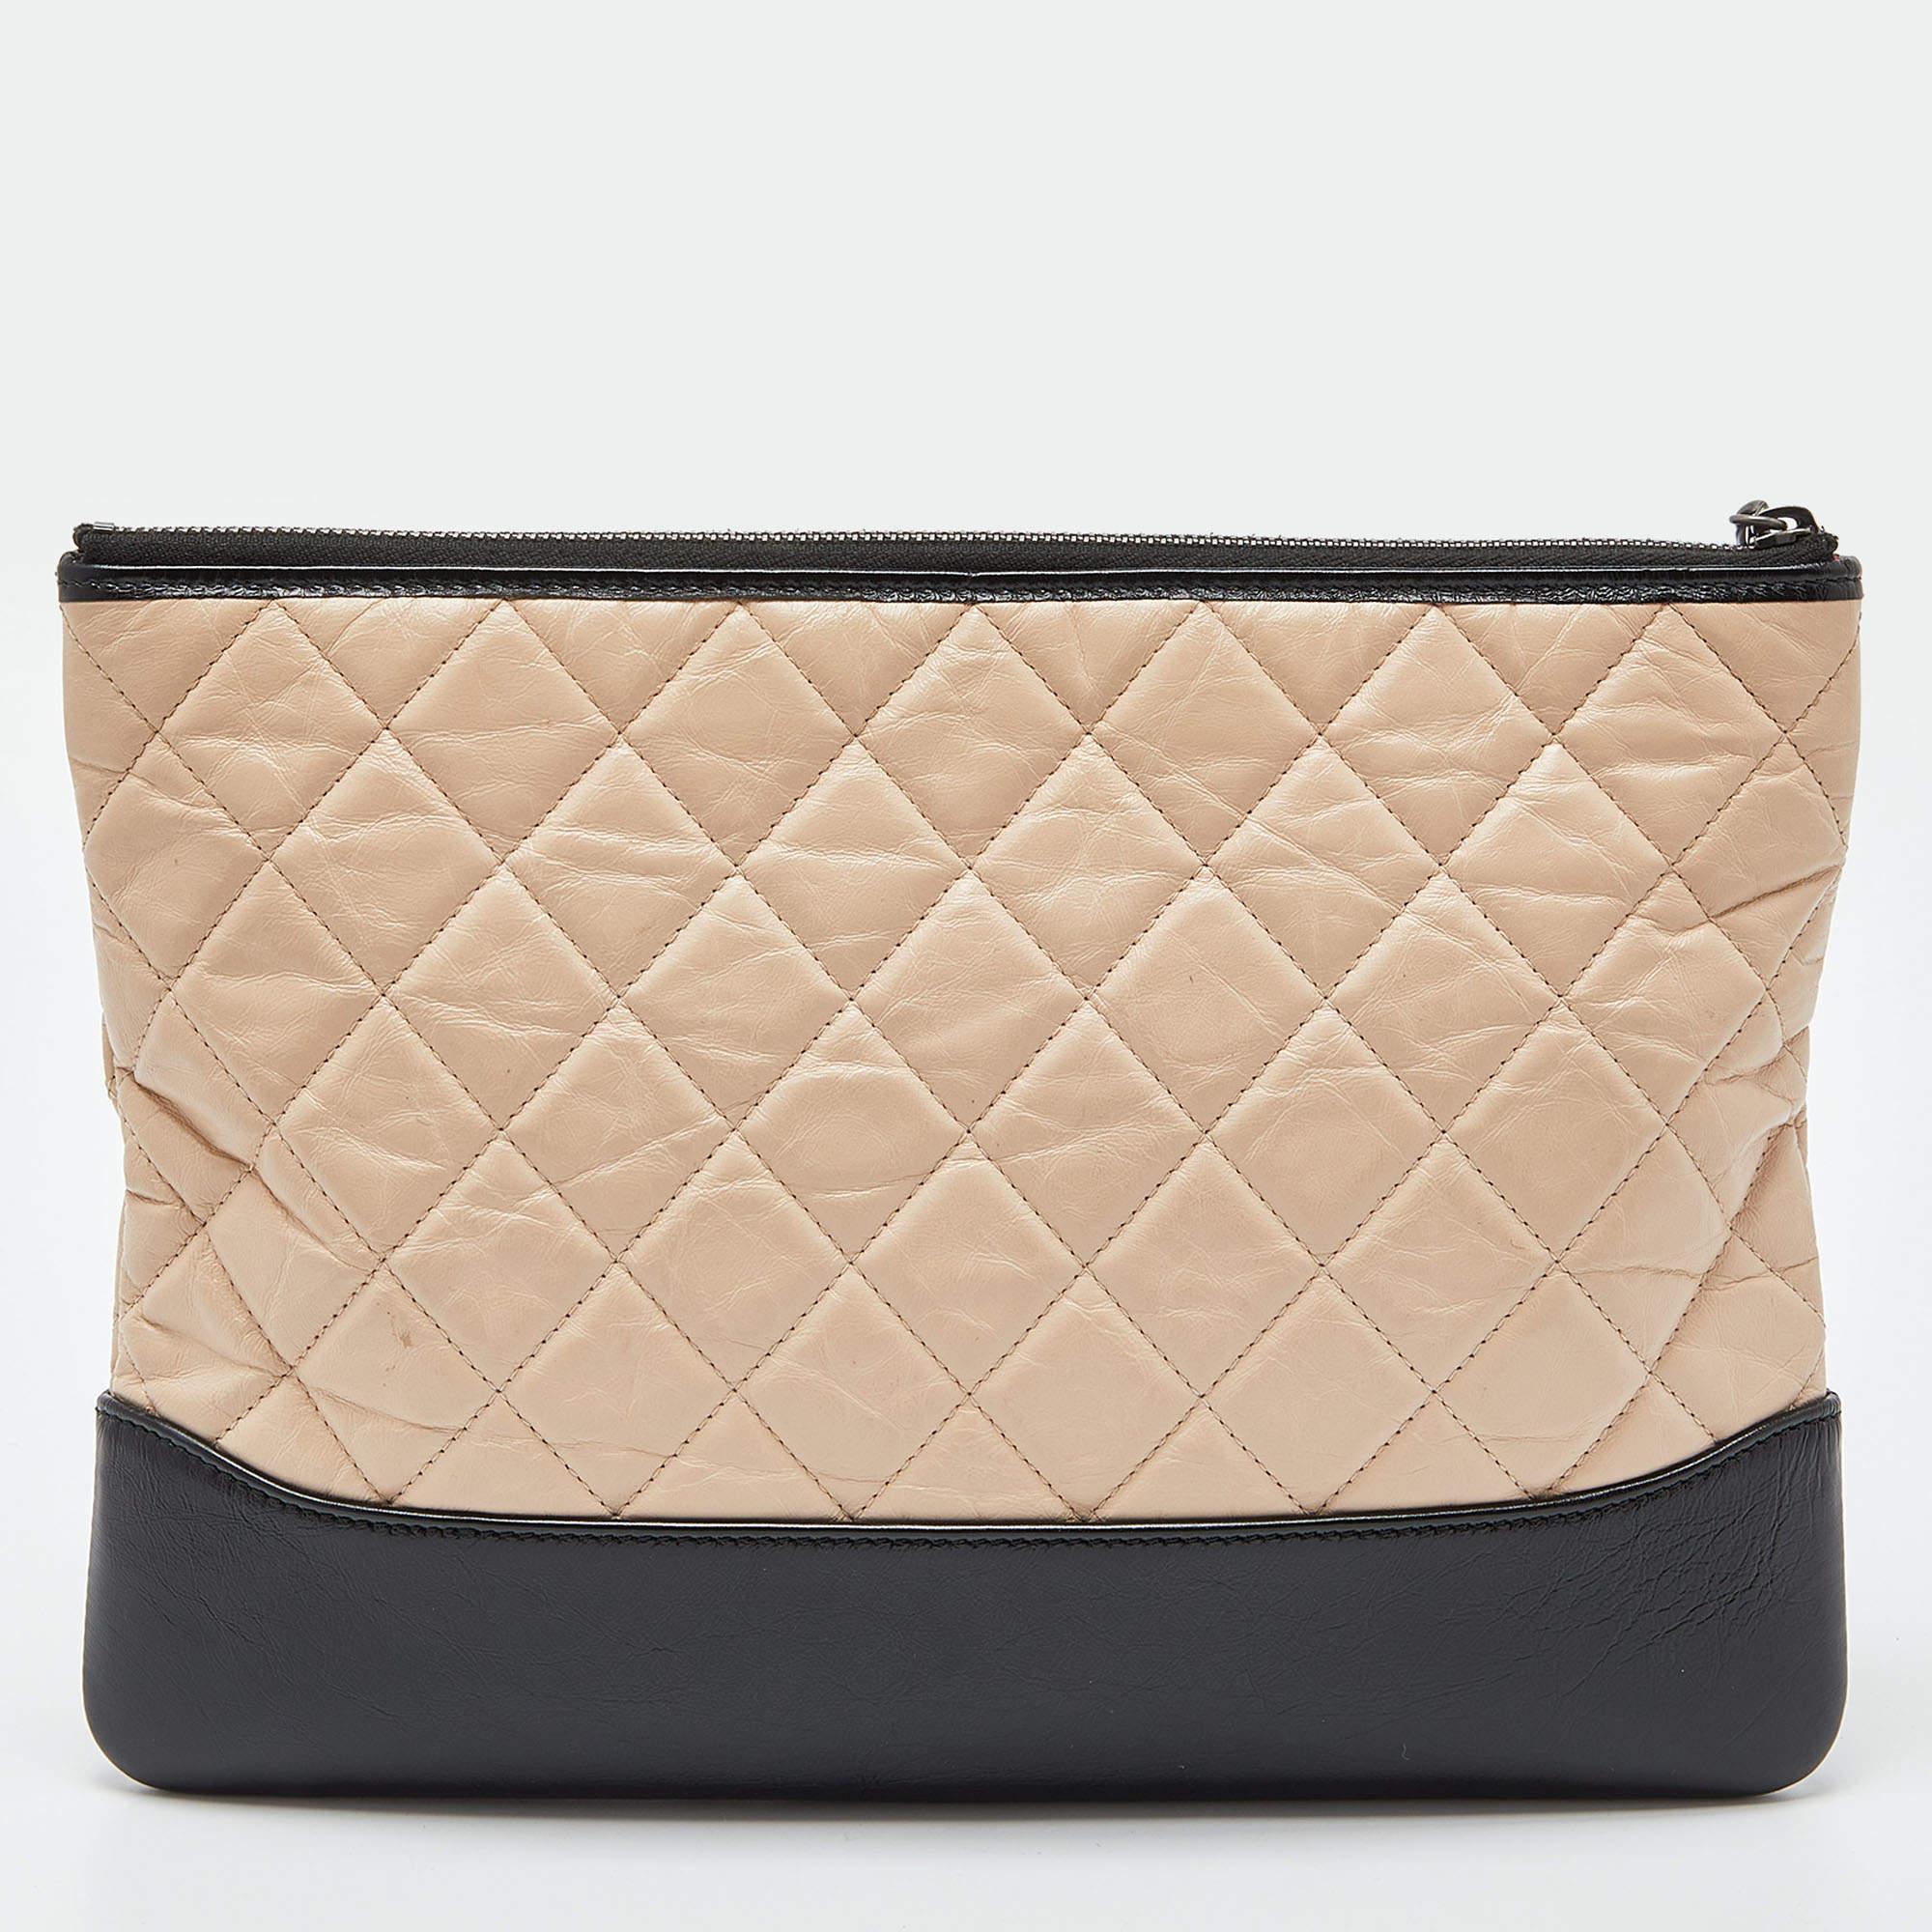 This Chanel clutch for women has the kind of design that ensures high appeal, whether held in your hand or tucked under your arm. It is a meticulously-crafted piece bound to last a long time.

